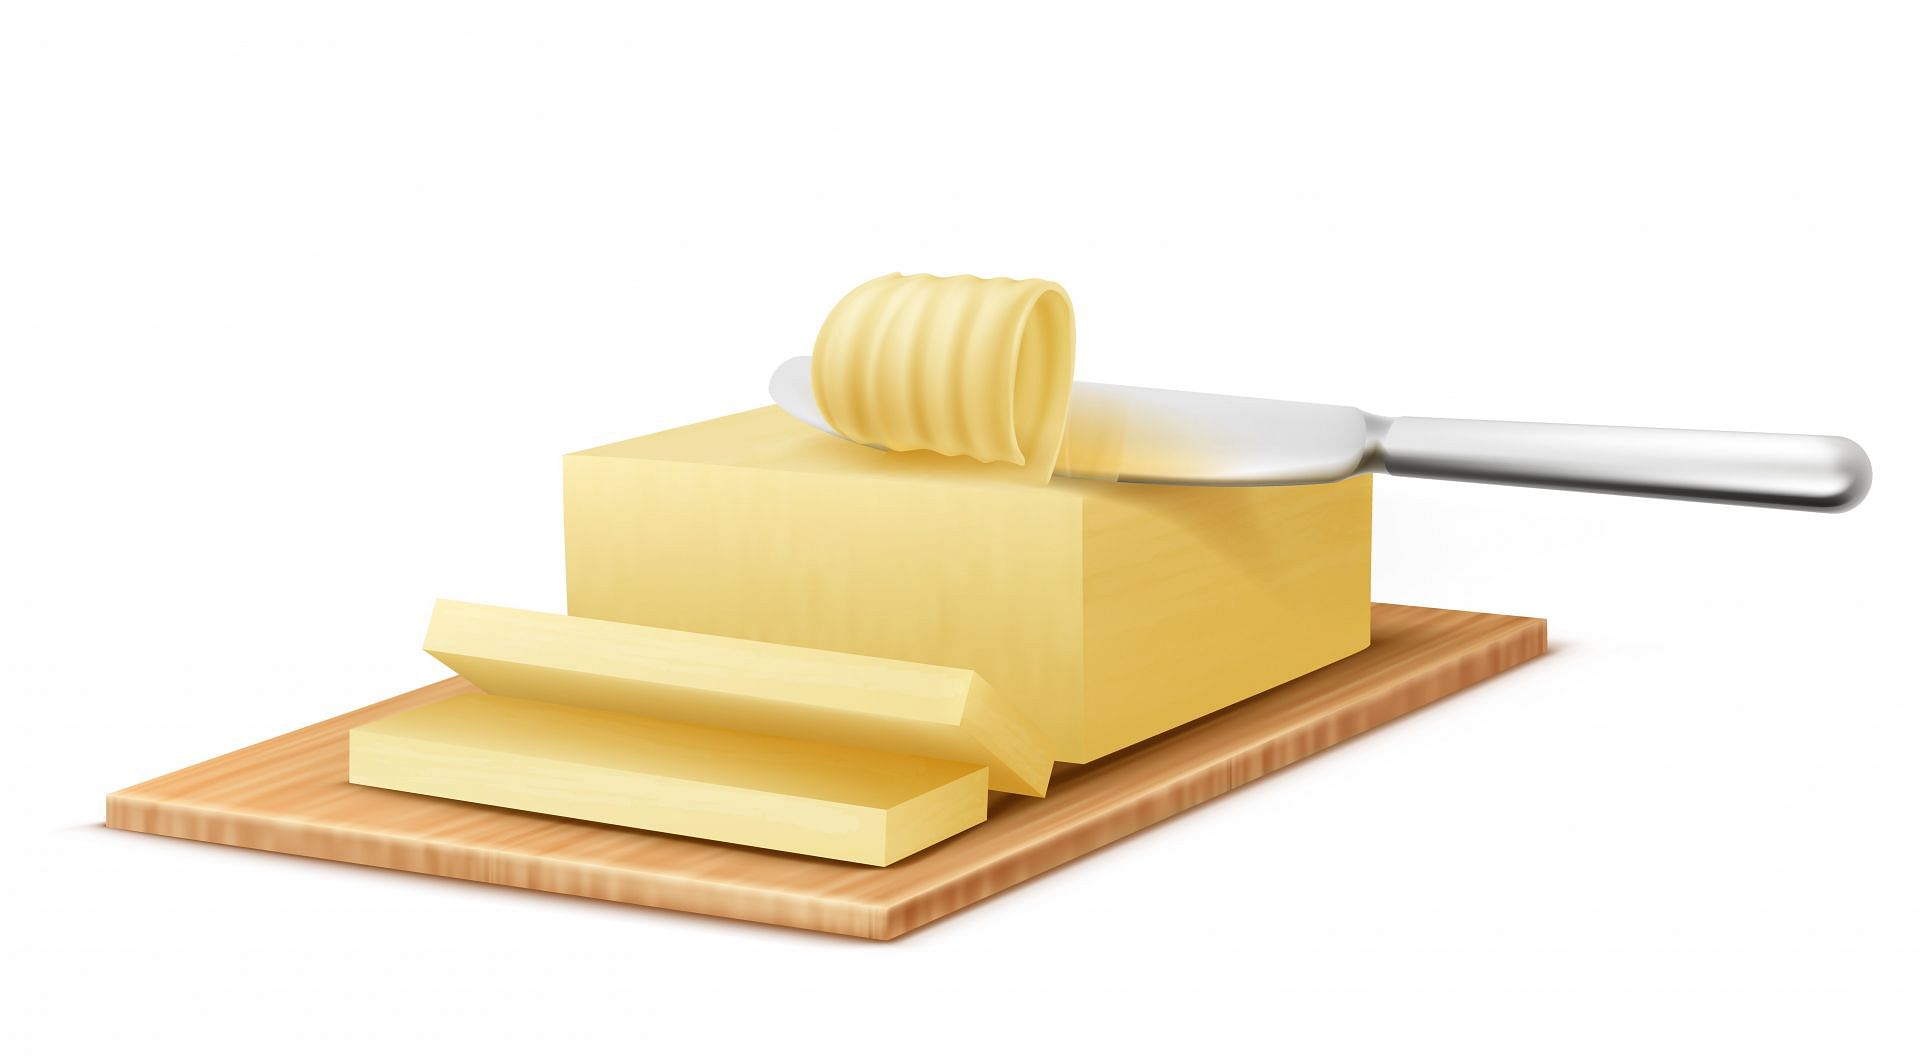 Butter should be consumed in a limit (Image by vectorpocket on Freepik)